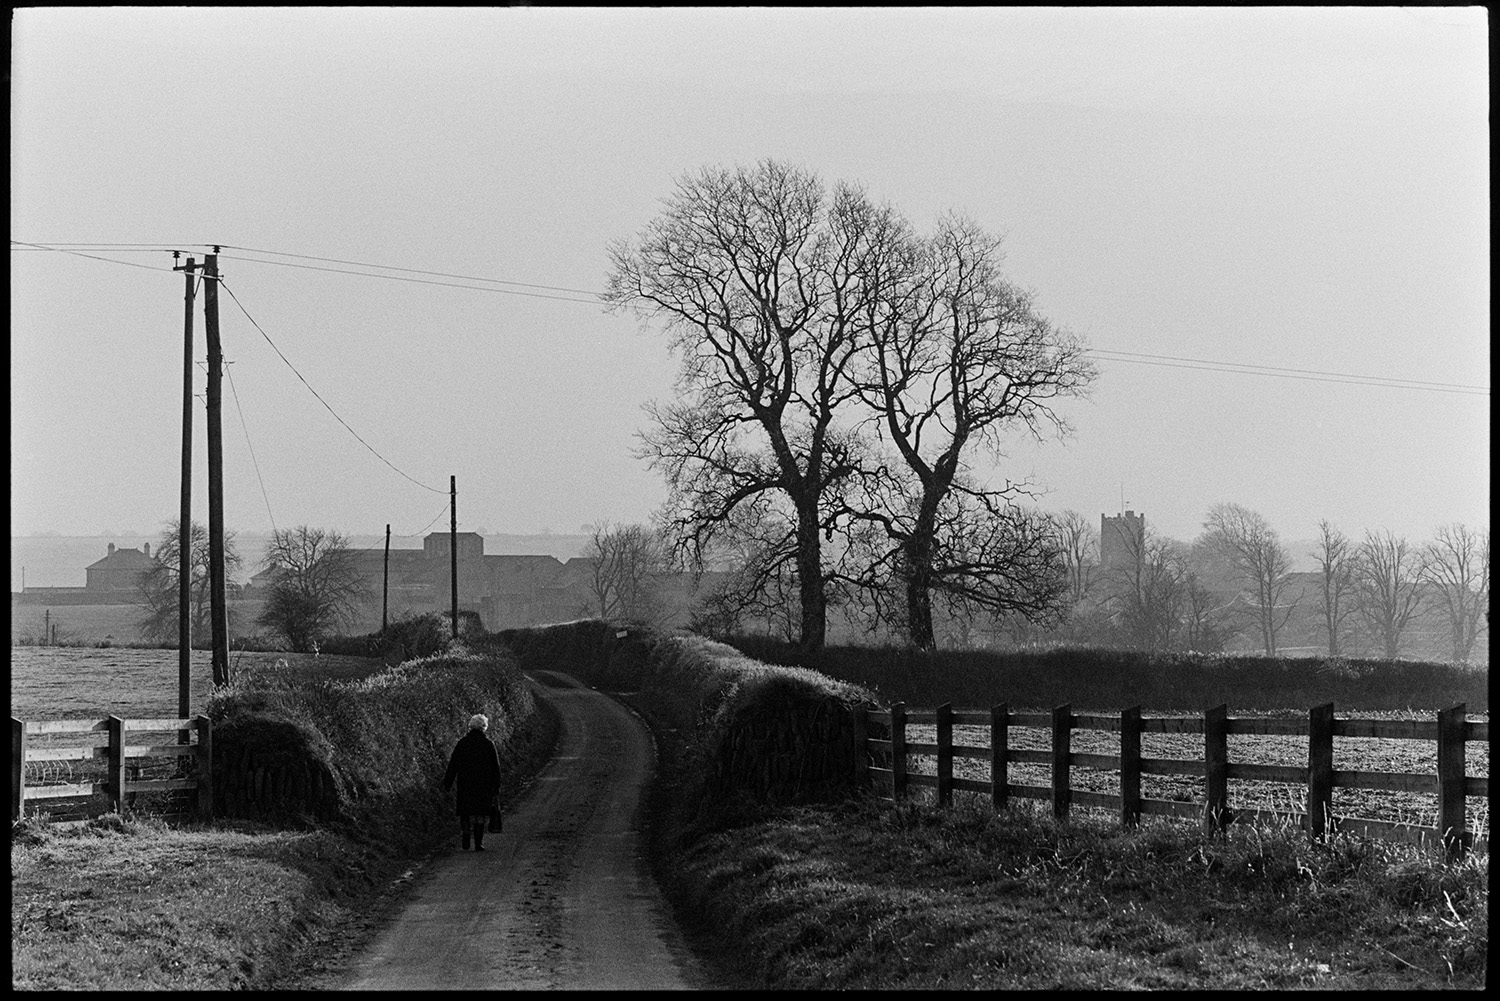 Road, cows in field on freezing day. 
[A woman walking down a road between hedges and fields at Burrington. Two elm trees can be seen in the background and Burrington Church tower is visible in the distance.]